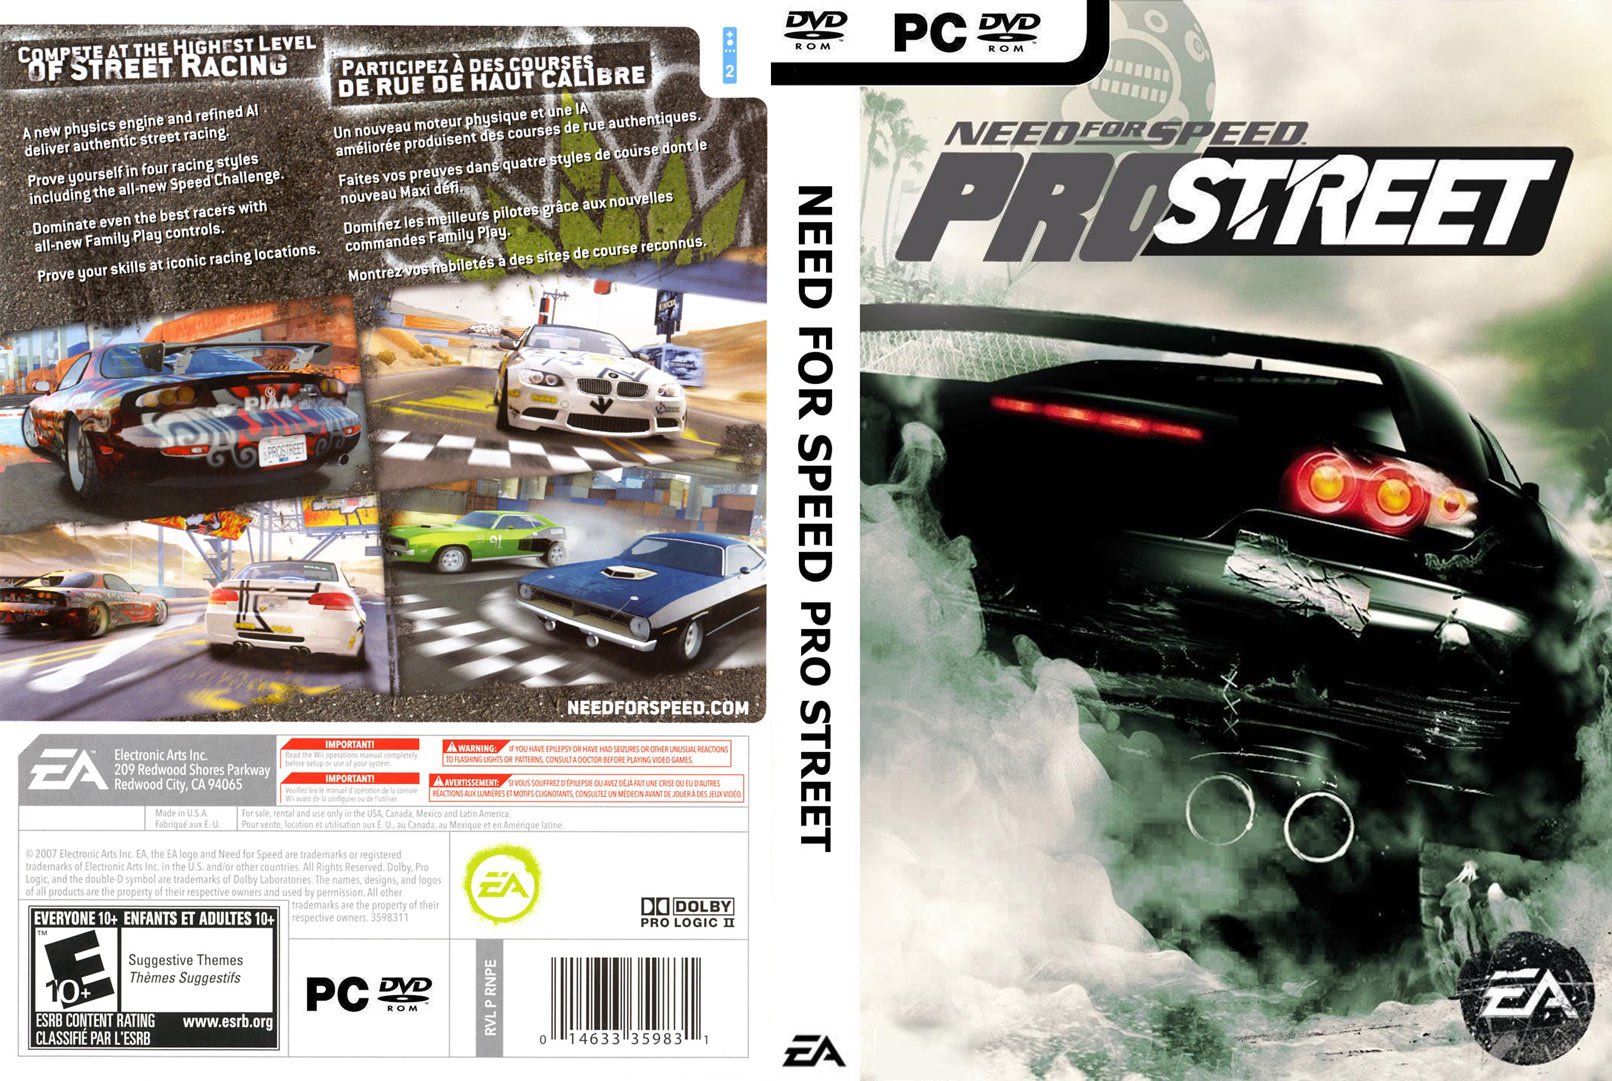 Need for Speed: ProStreet - DVD obal 3